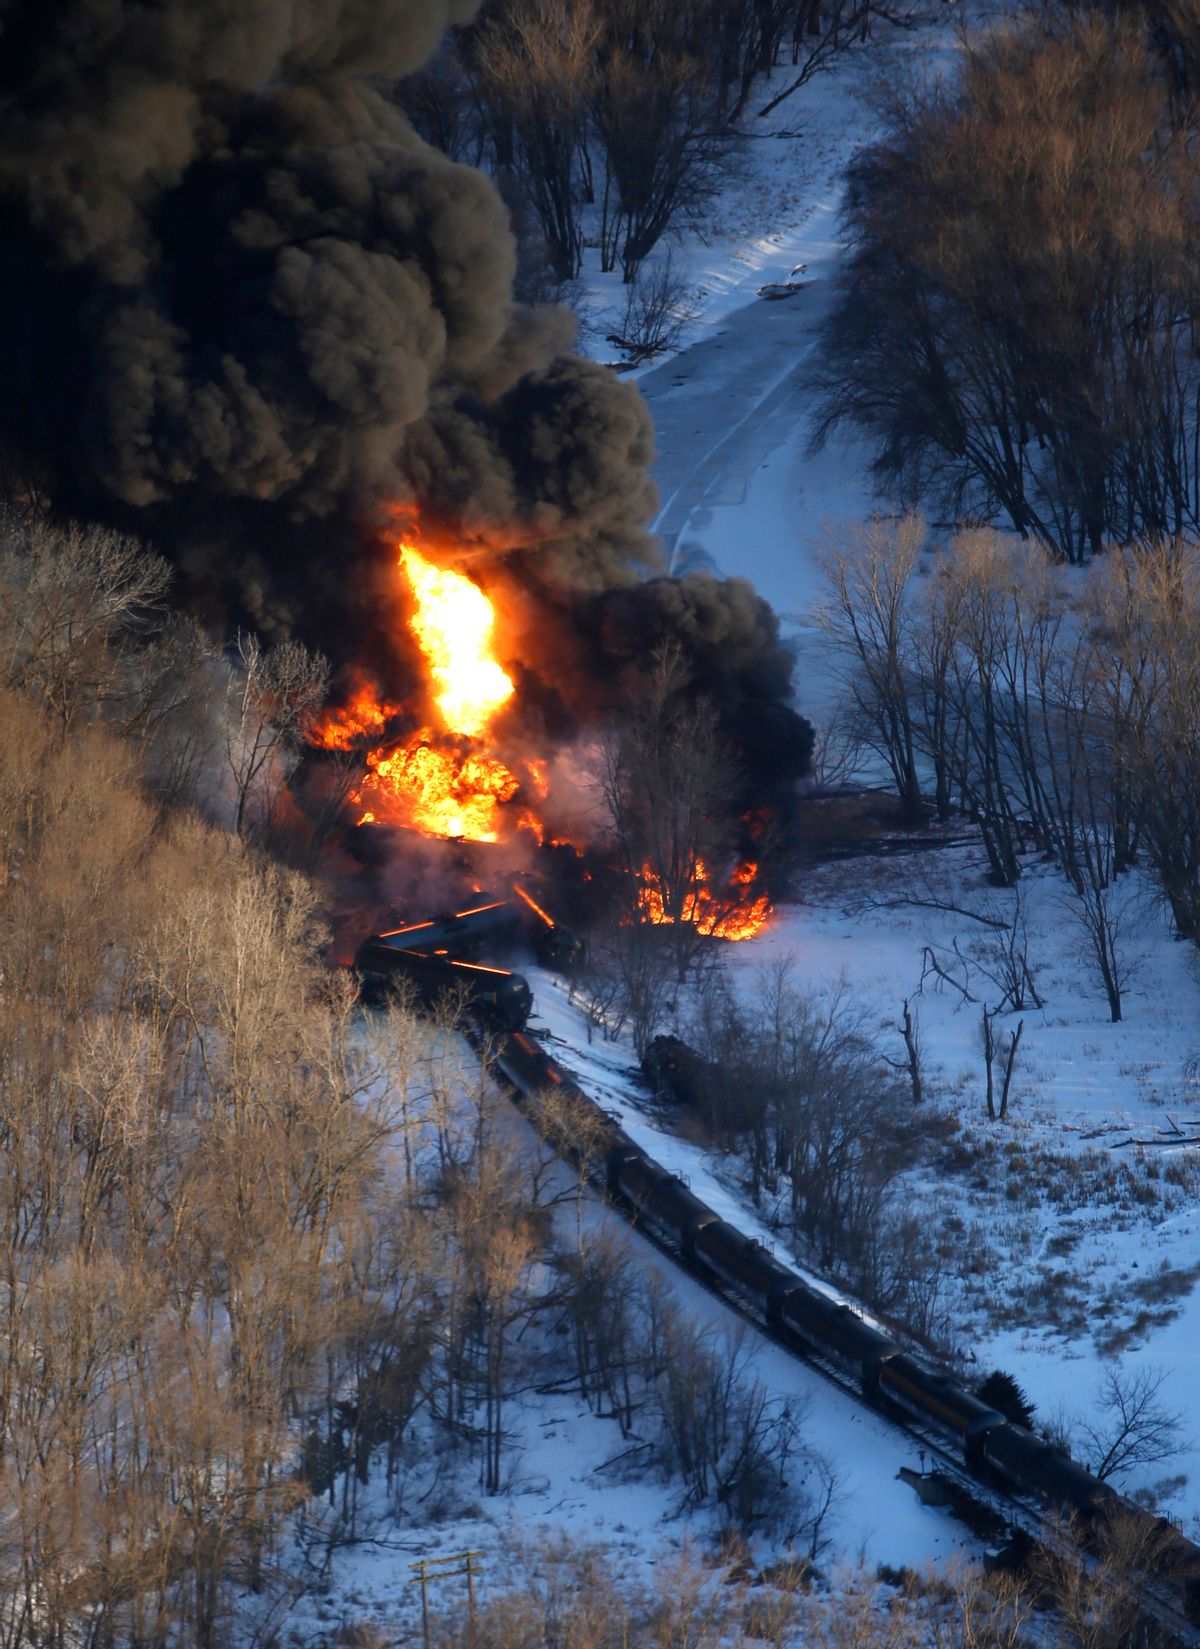 Smoke and flames erupt from the scene of a train derailment Thursday, March 5, 2015, near Galena, Ill. A BNSF Railway freight train loaded with crude oil derailed around 1:20 p.m. in a rural area where the Galena River meets the Mississippi, said Jo Daviess County Sheriff's Sgt. Mike Moser. (AP Photo/Telegraph Herald, Mike Burley)  (AP)